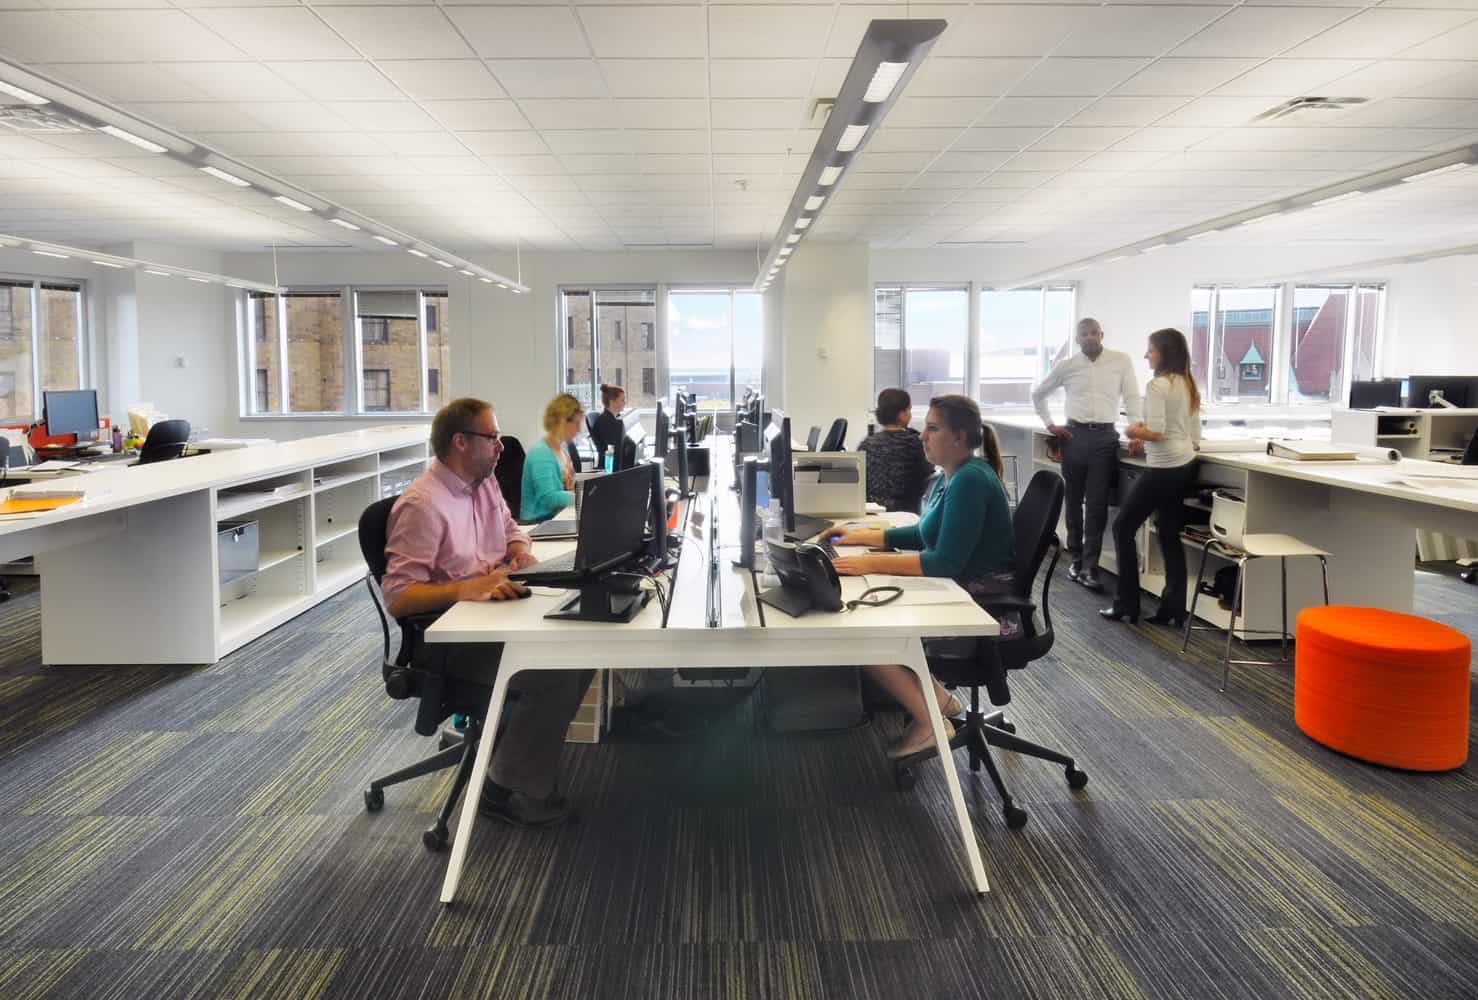 A Workplace Evolution: Enhancing the Way We Work